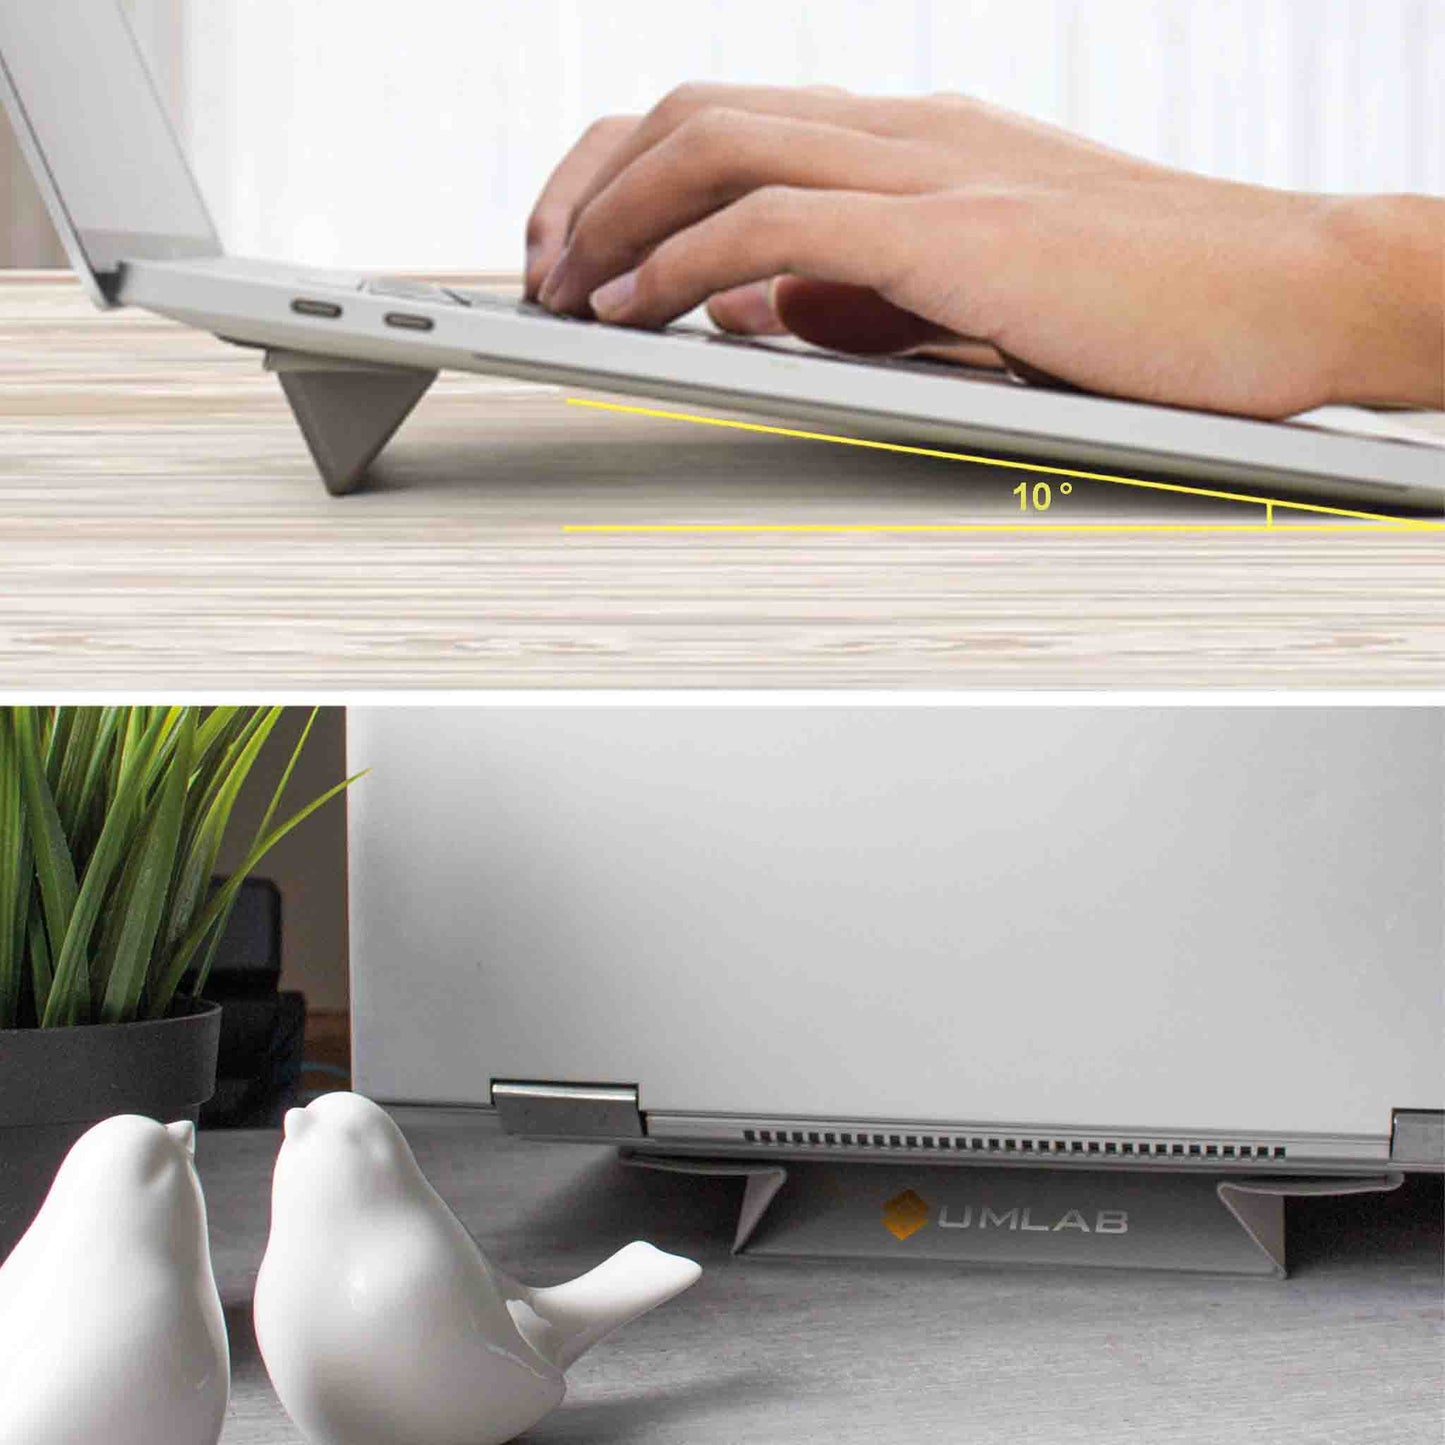 MagStand "laptop" cell phone holder